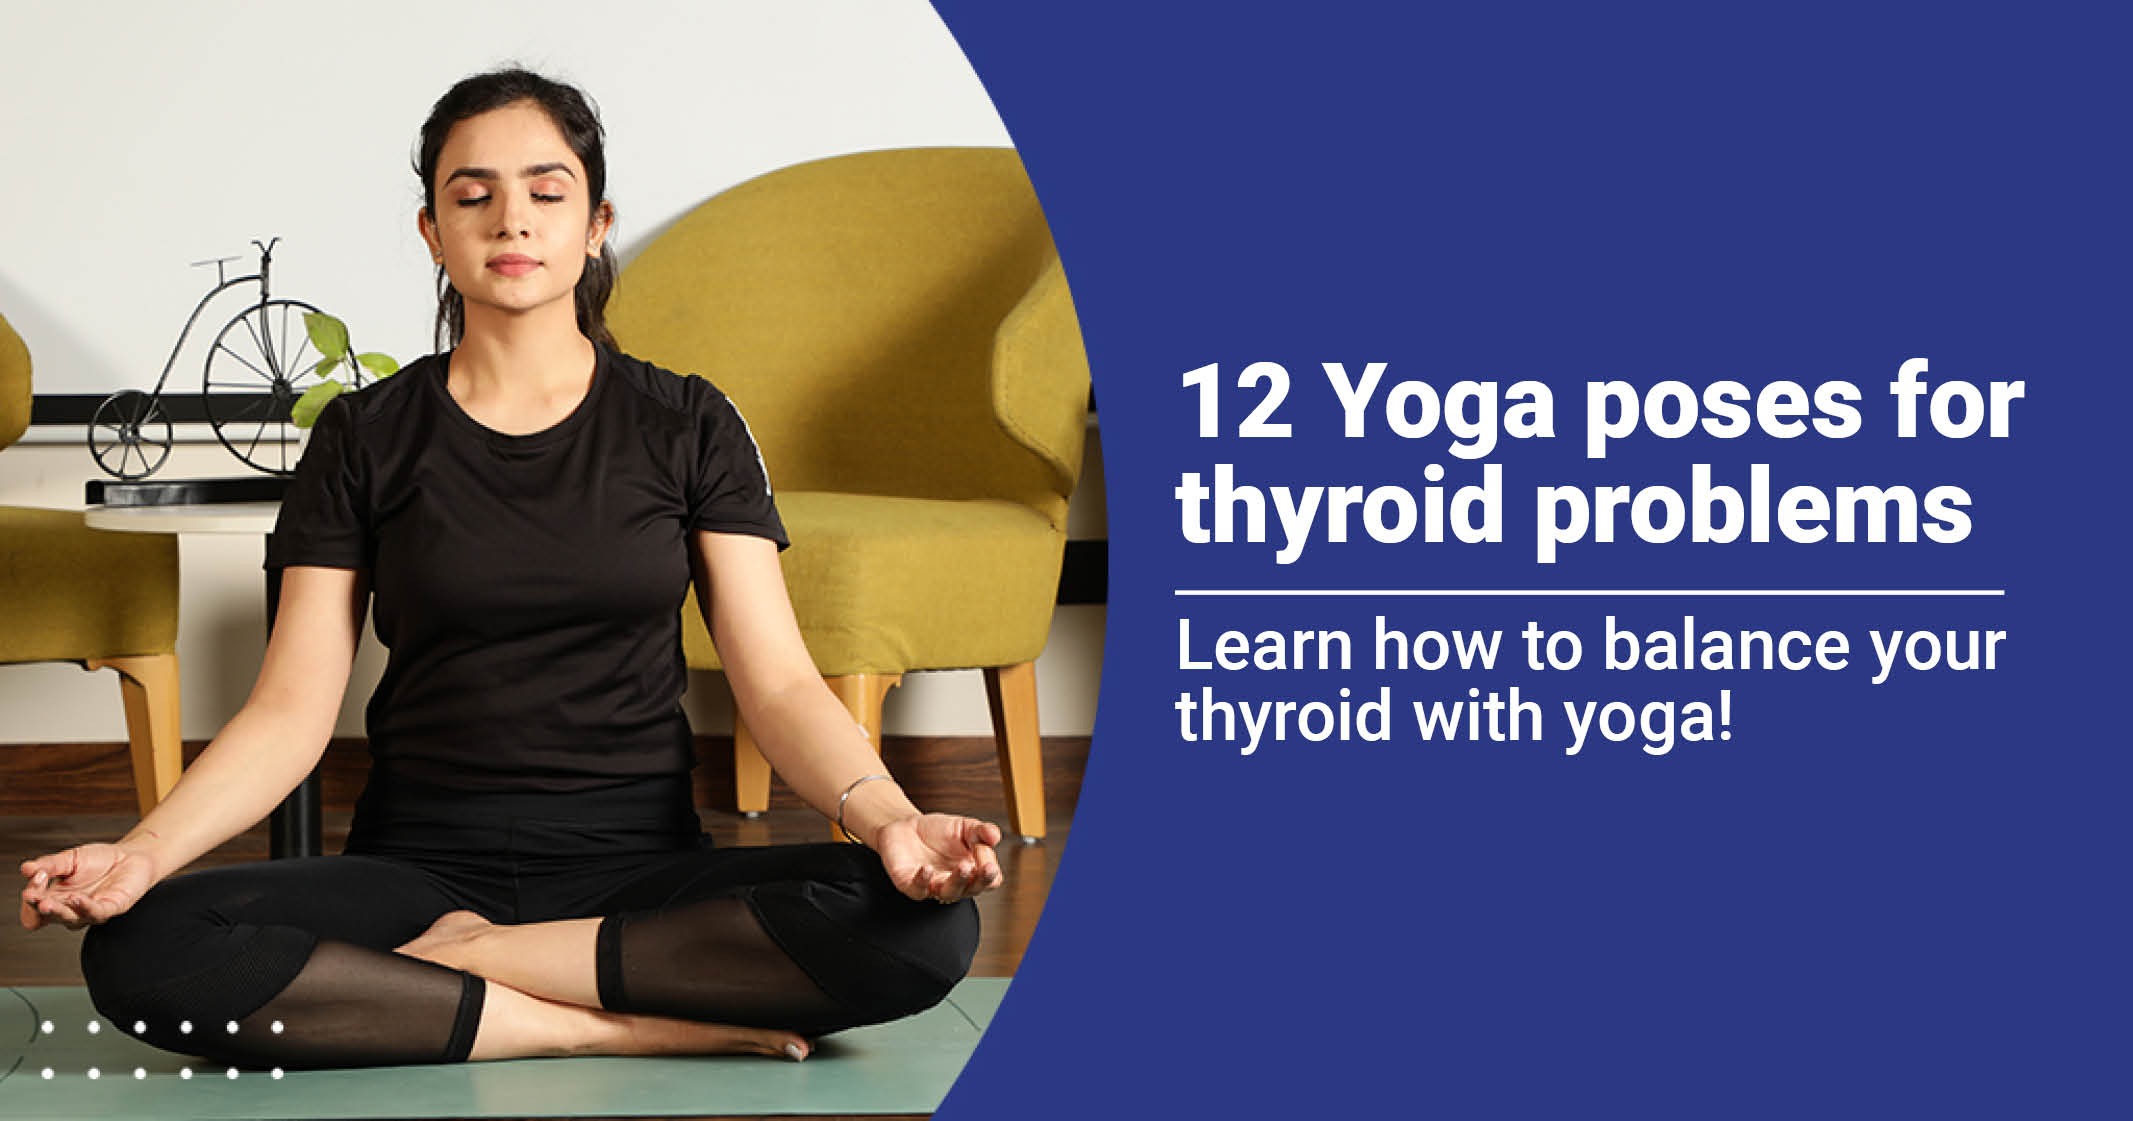 11 Yoga Poses for Thyroid Problems » SIMPLY MYSELF